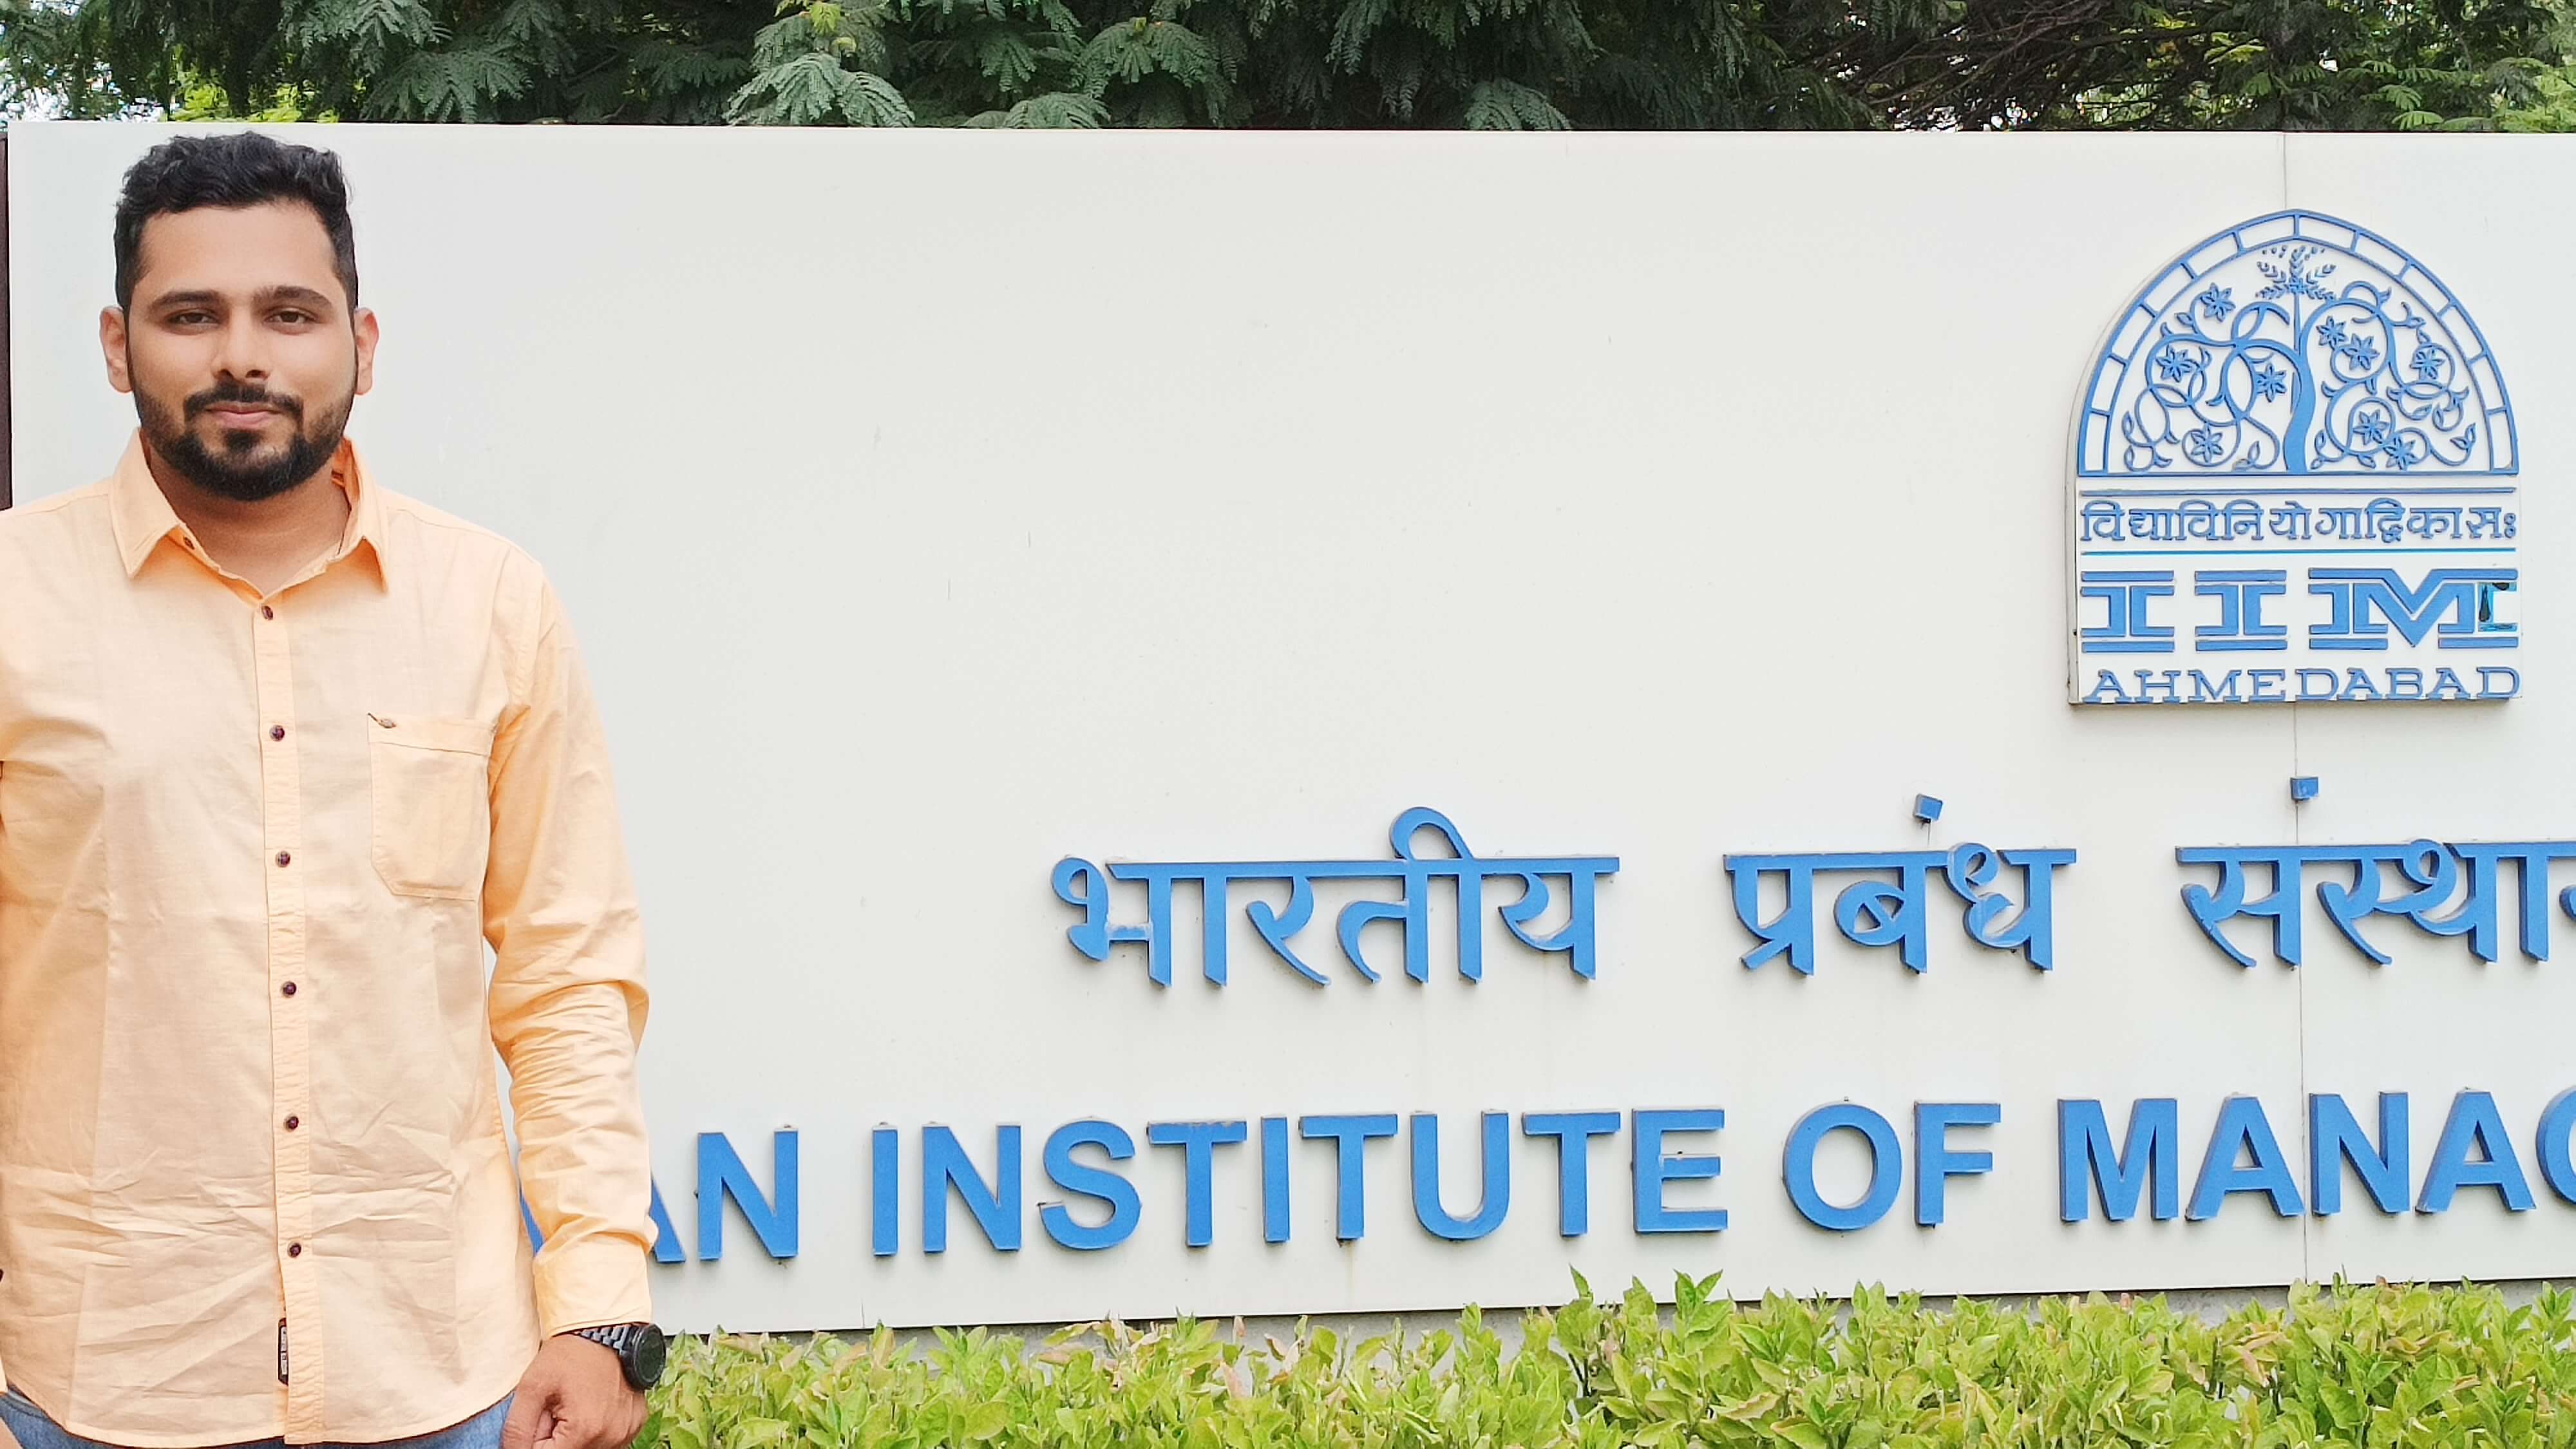 Ritwik at Indian Institute of Ahmedabad